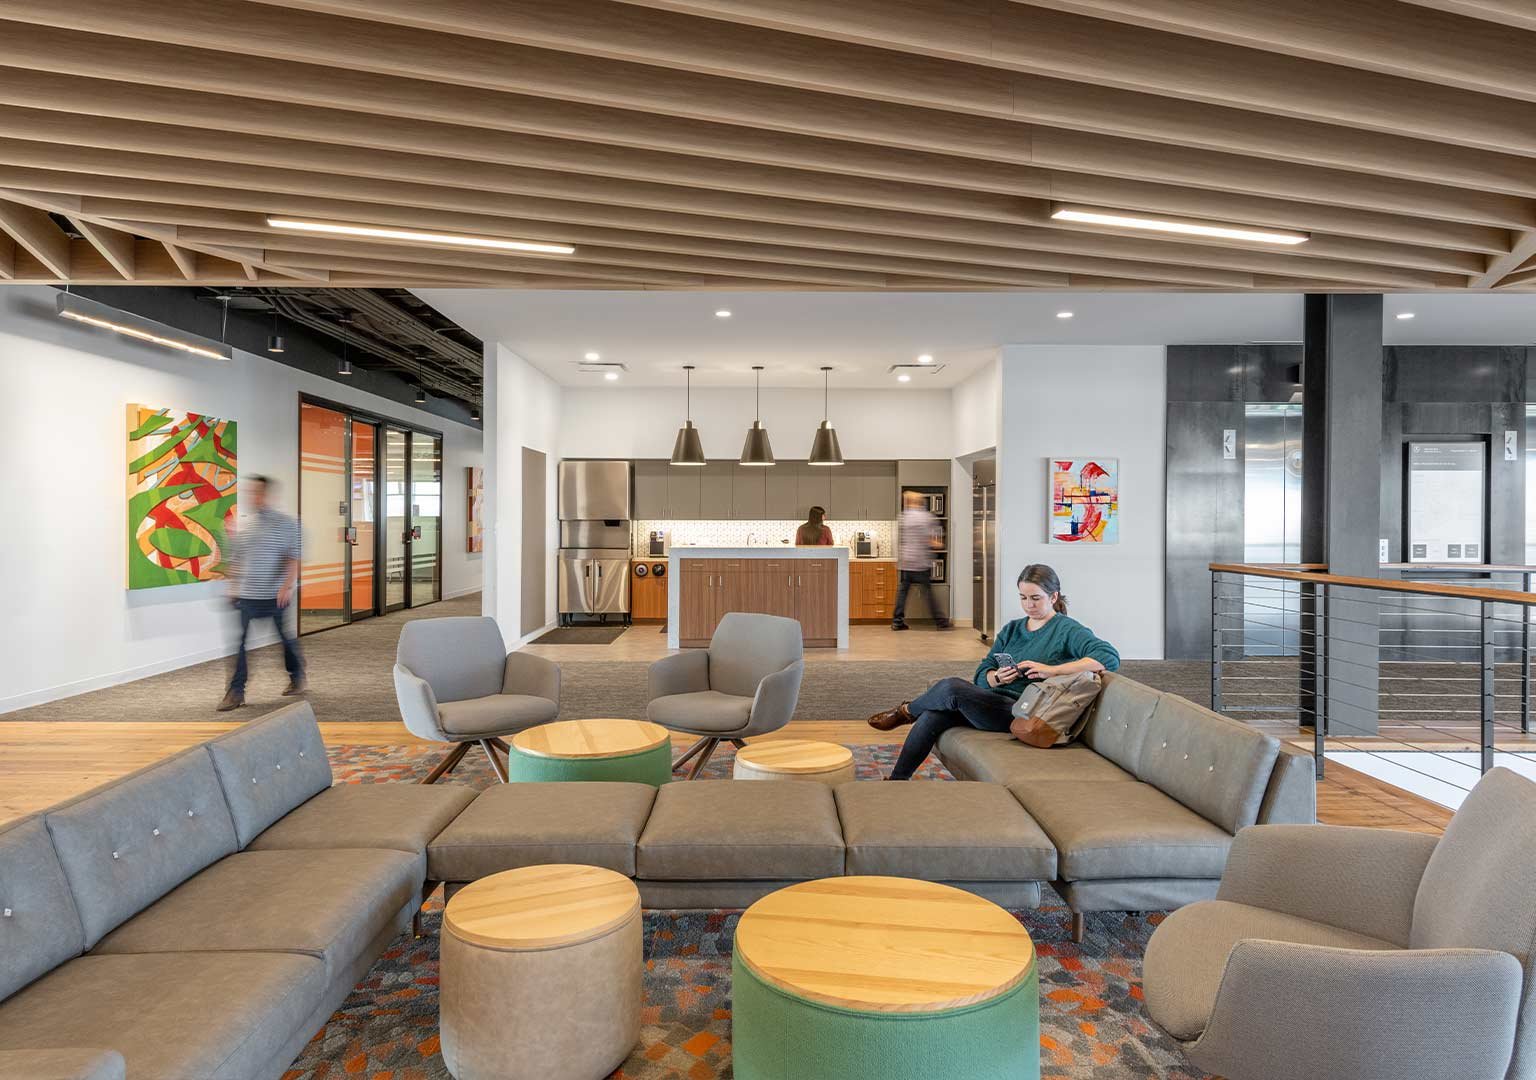 Communal Spaces for employee engagement